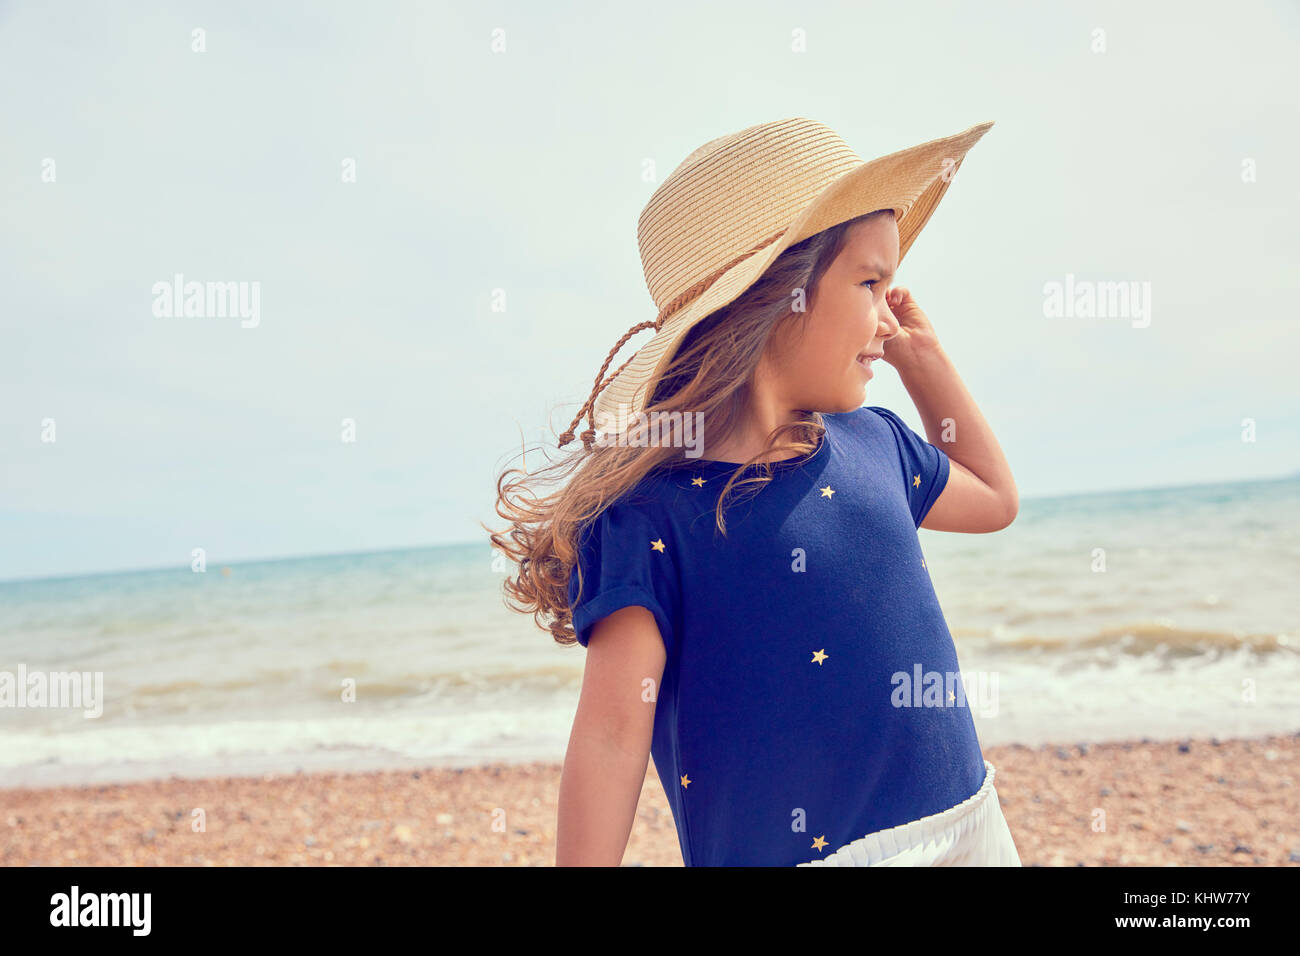 Young girl, standing on beach, looking away Stock Photo